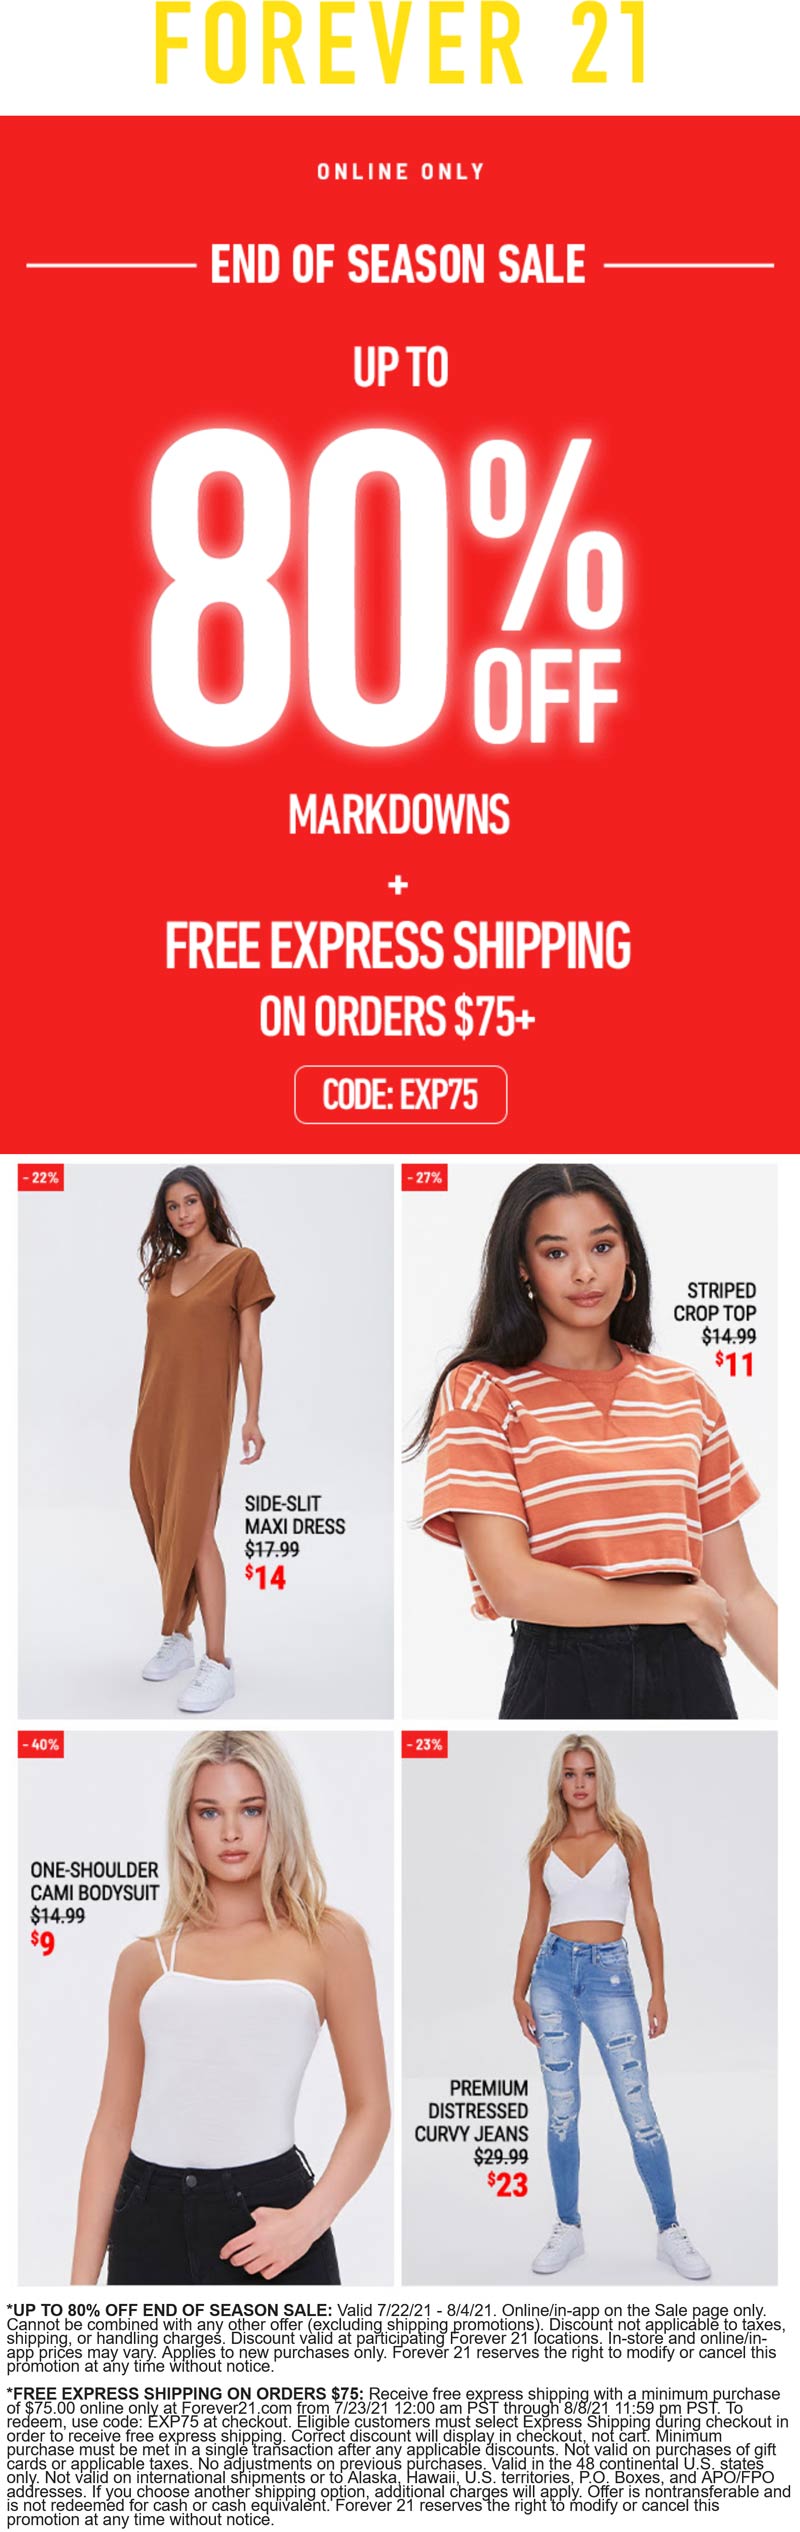 Forever 21 stores Coupon  End of season 80% off online at Forever 21 #forever21 